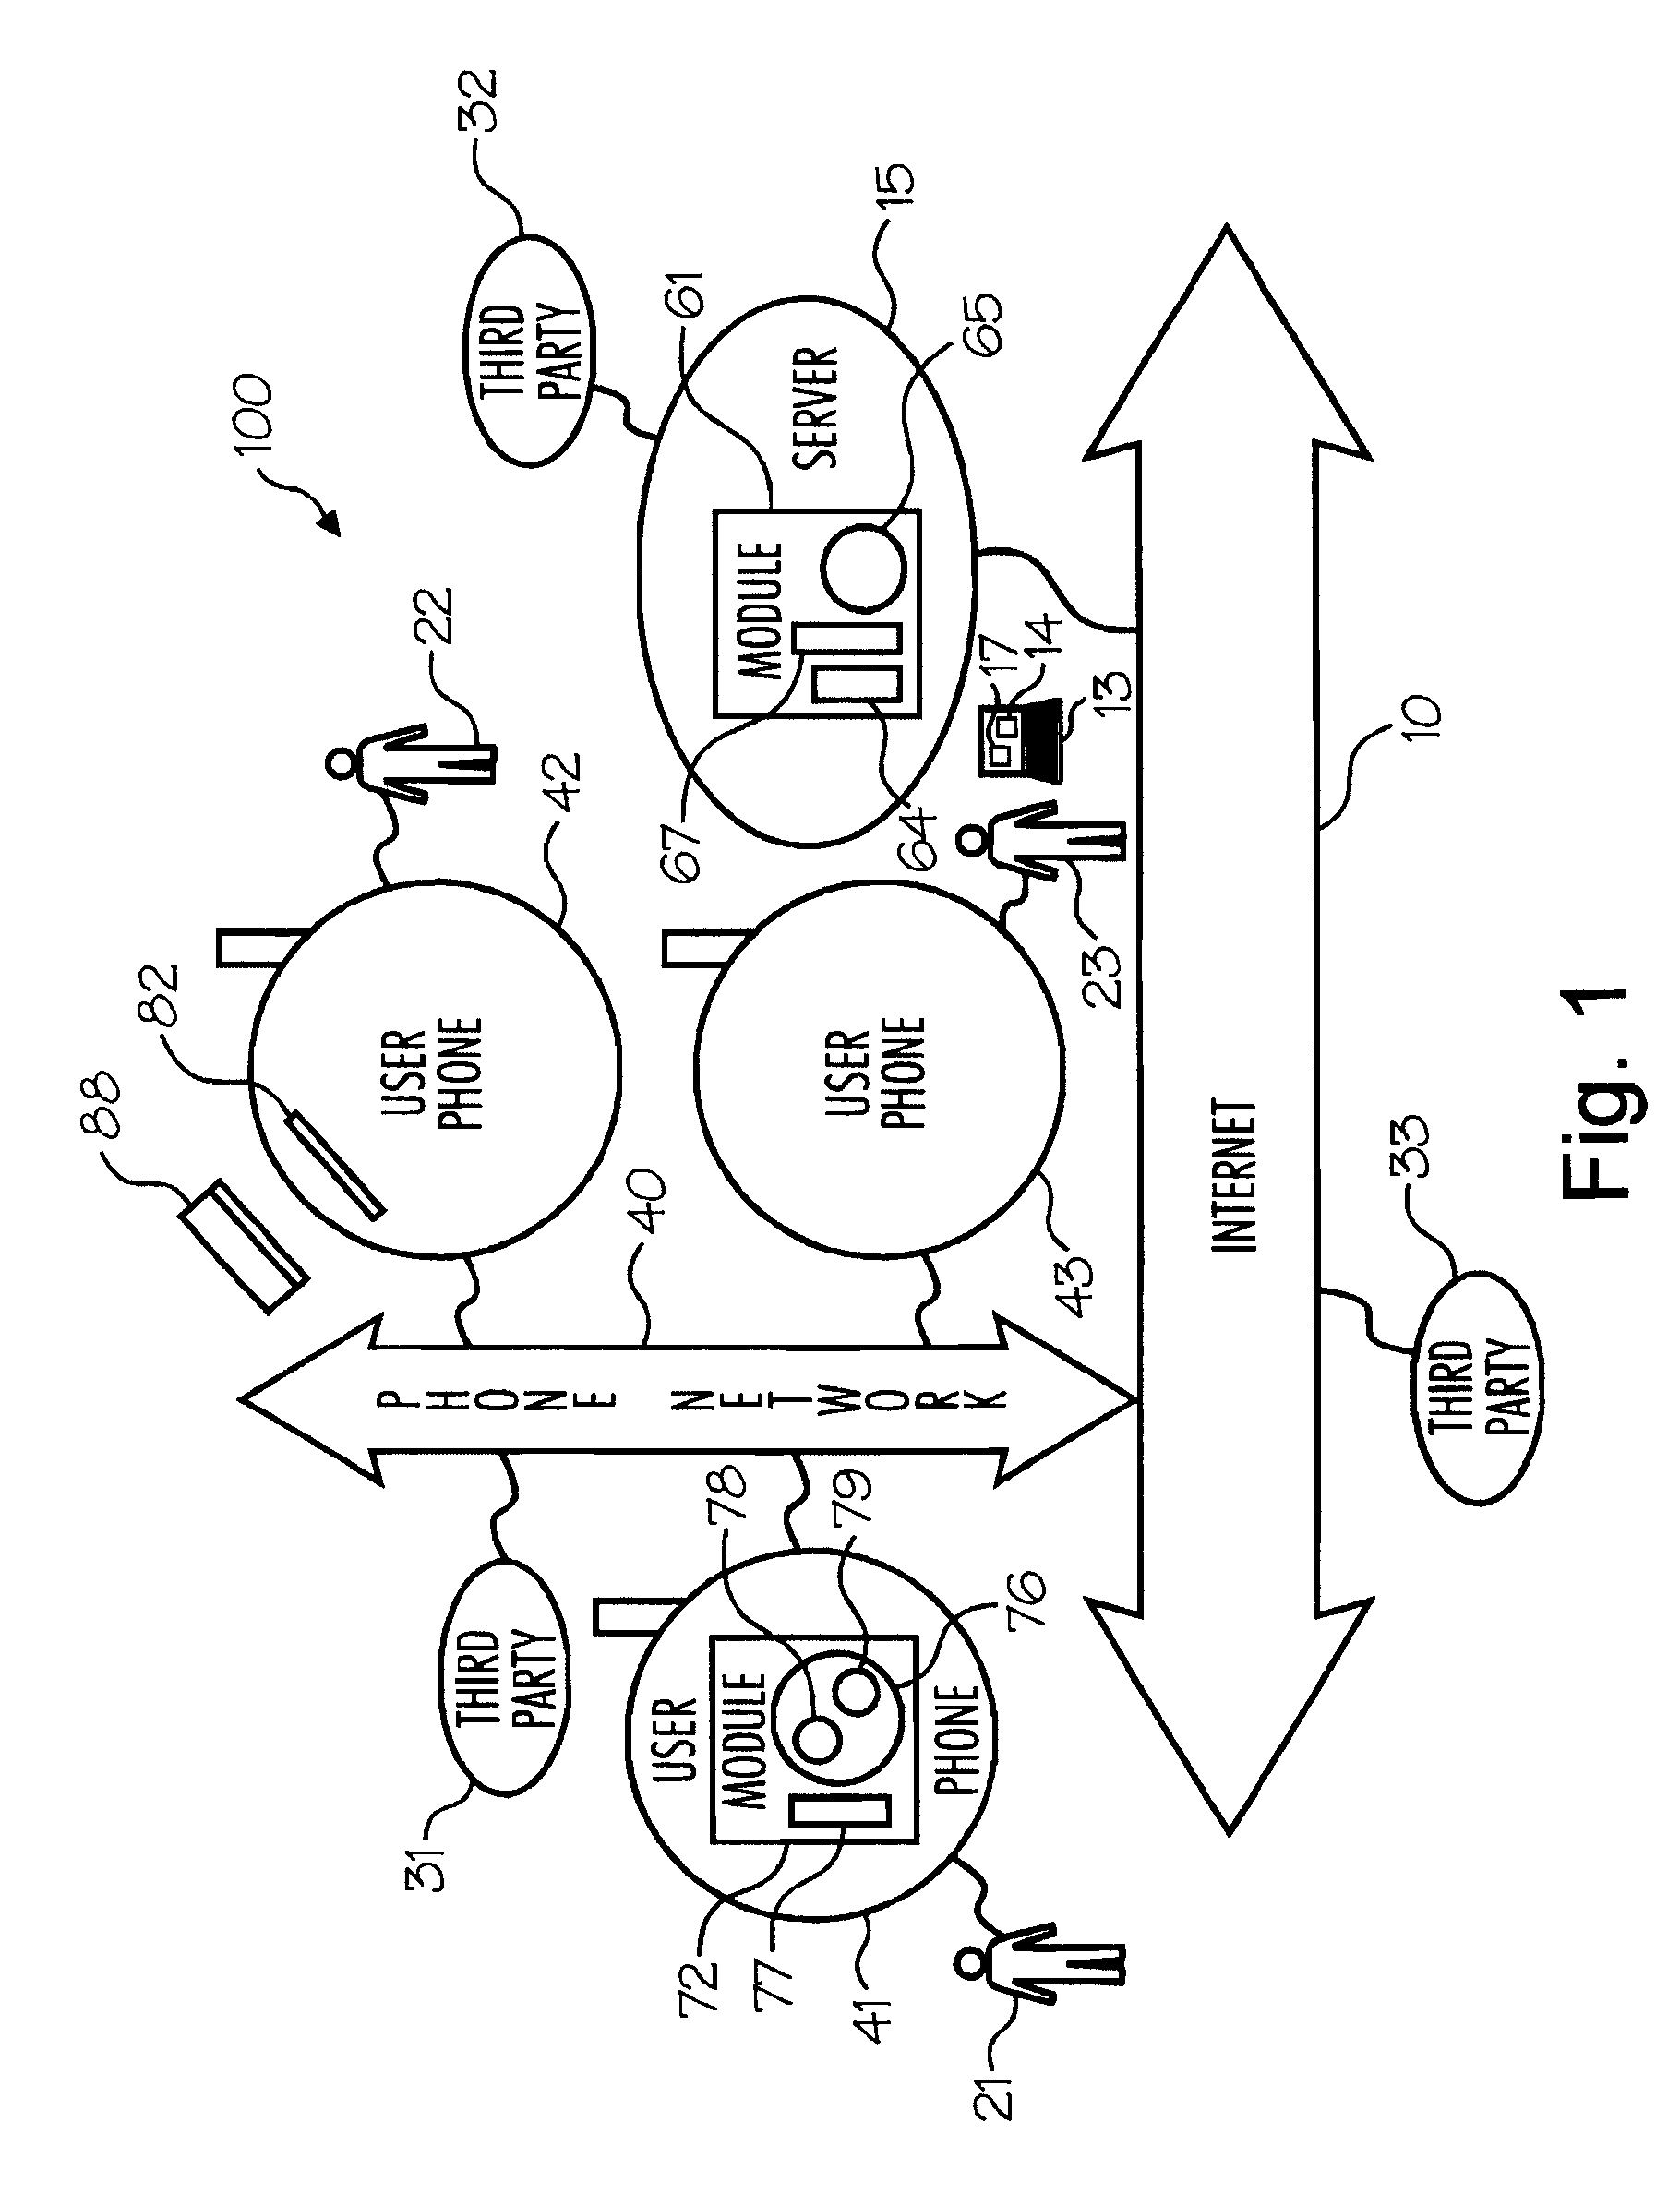 Extraction of information from e-mails and delivery to mobile phones, system and method